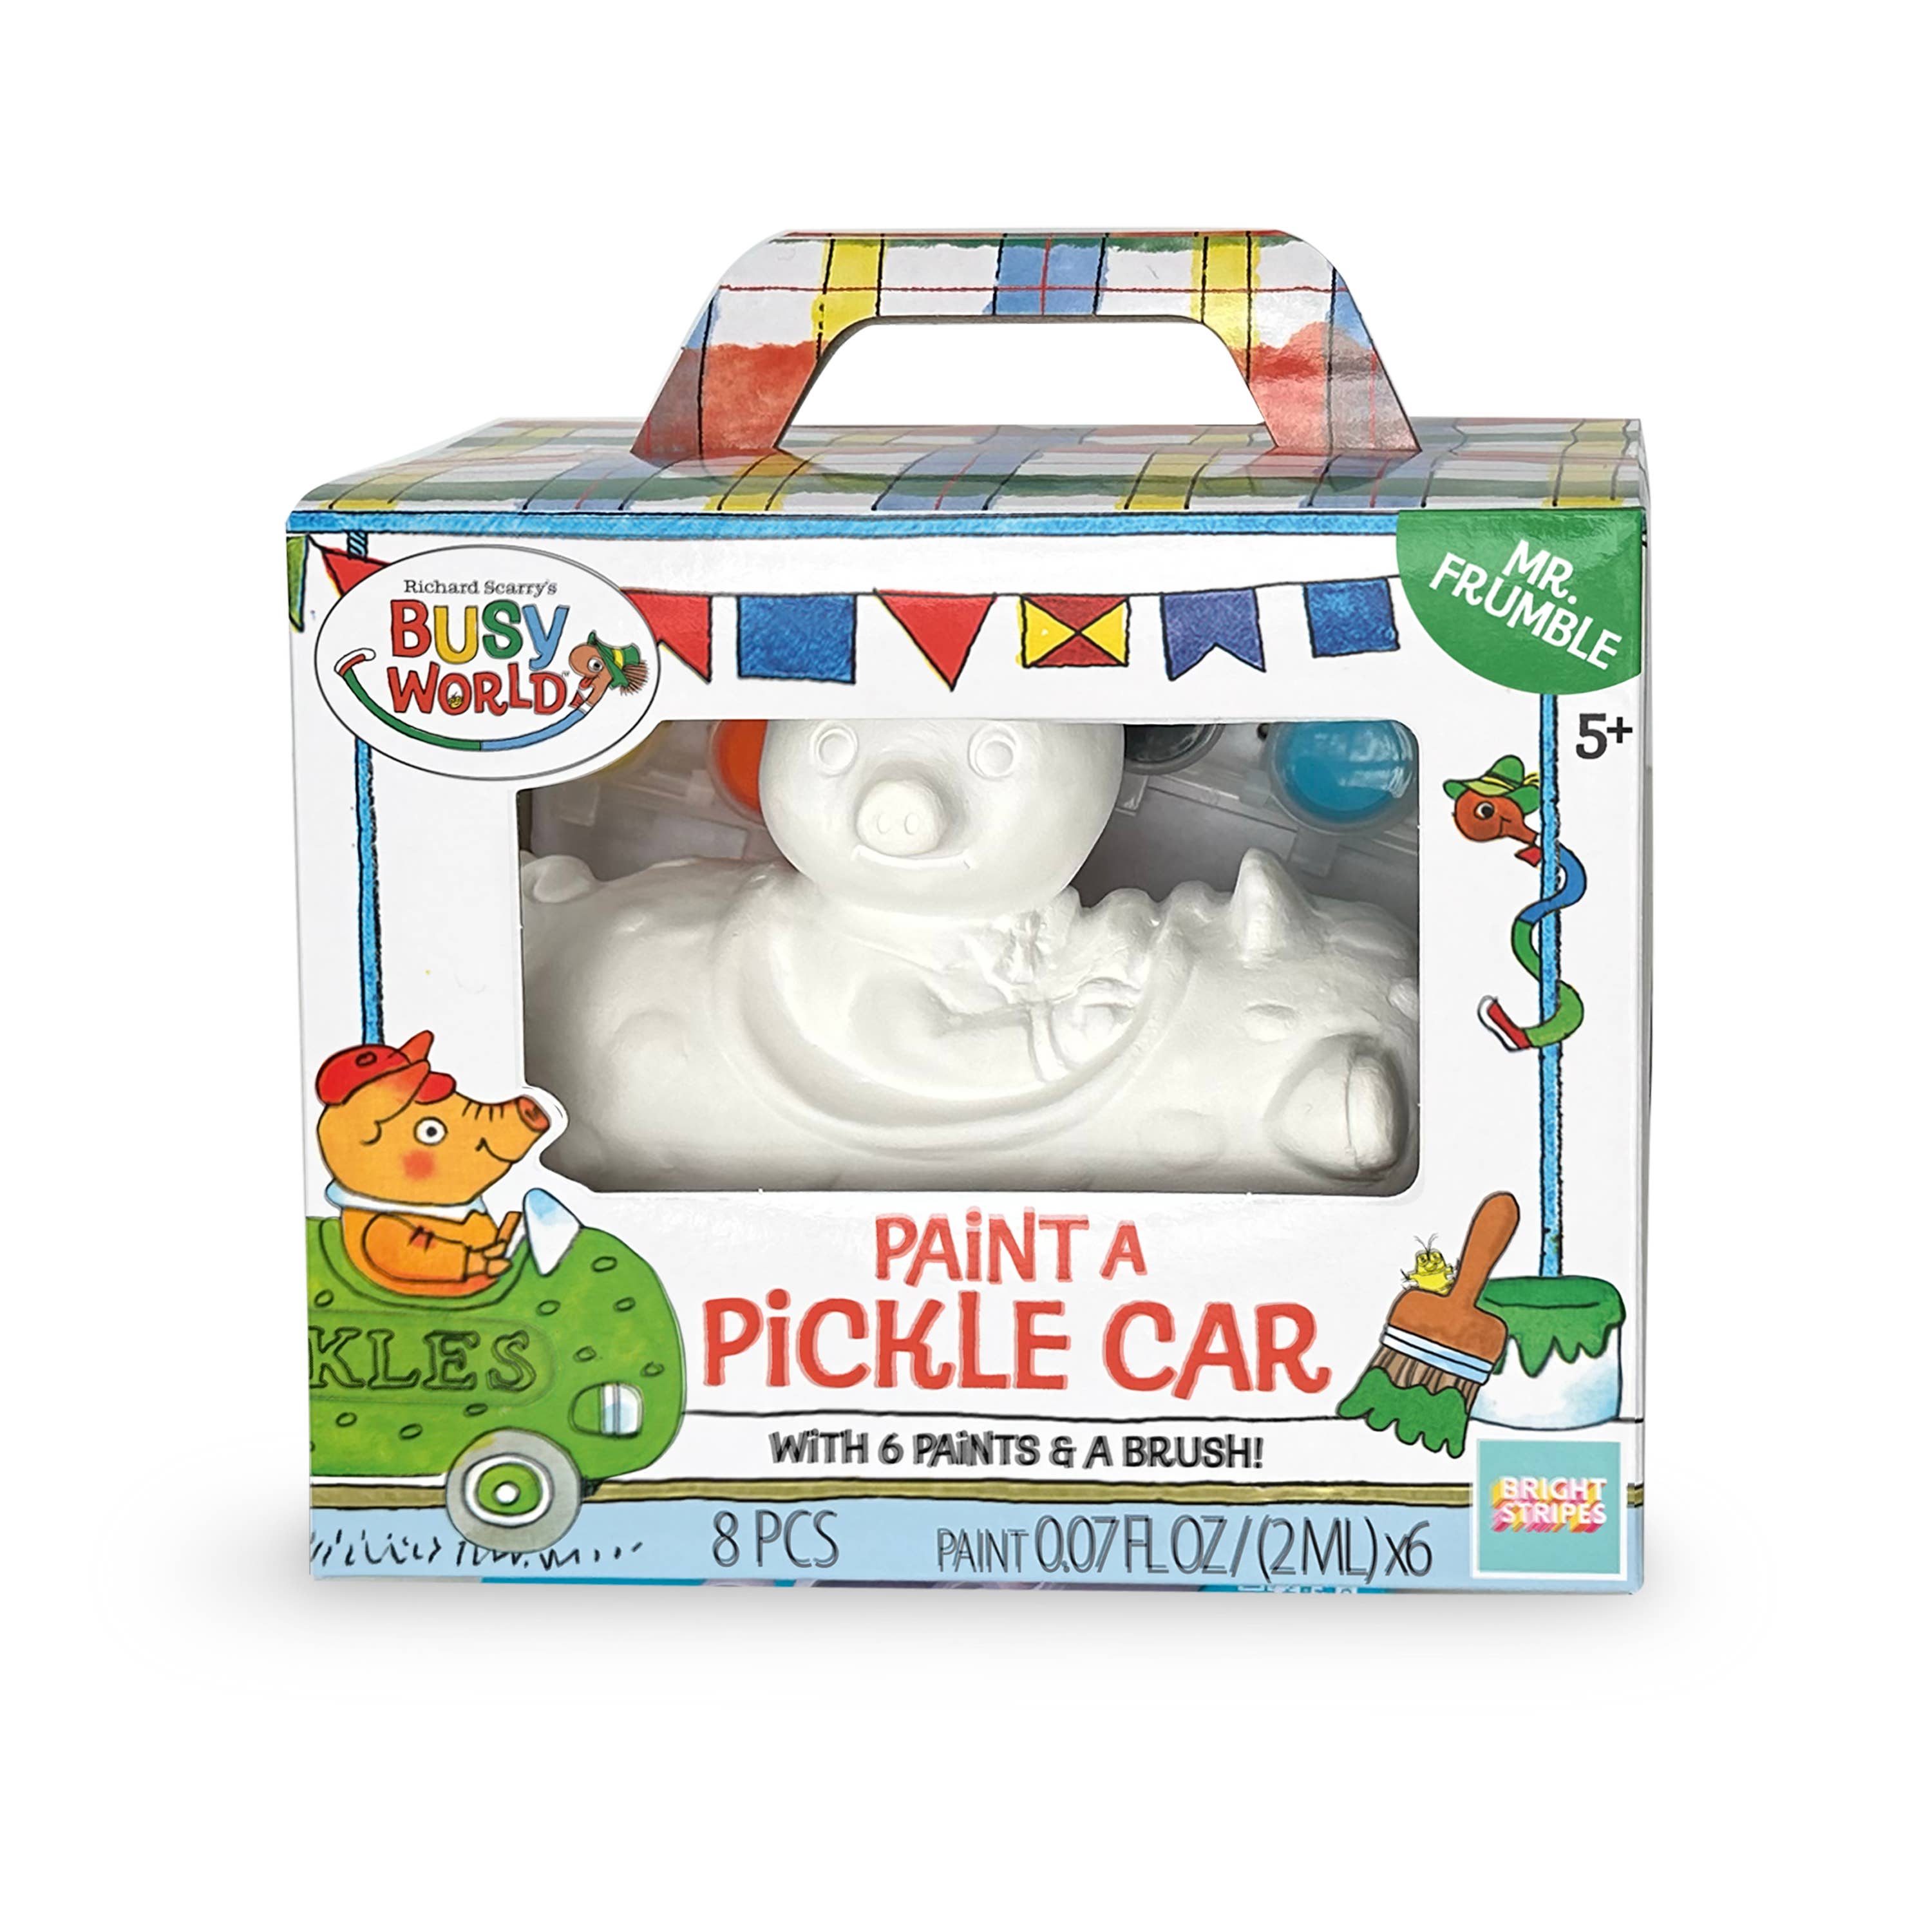 Richard Scarry's Busy World® Paint A Racer: Pickle Car